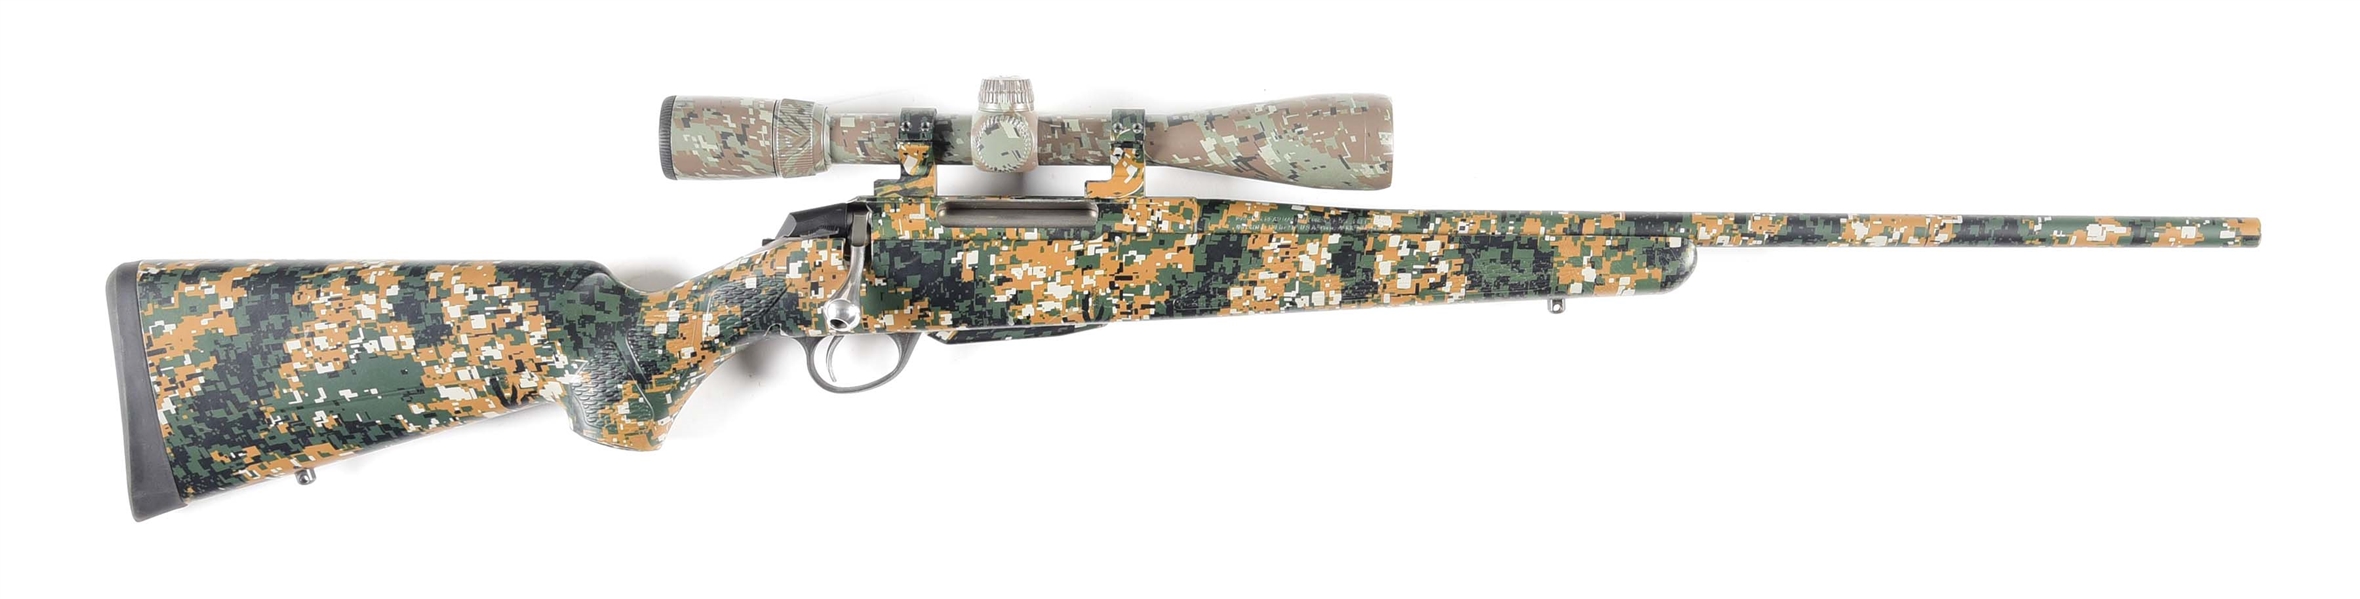 (M) TIKKA T3 .308 BOLT ACTION RIFLE, COATED BY TIGER STRIKE PRODUCTS.